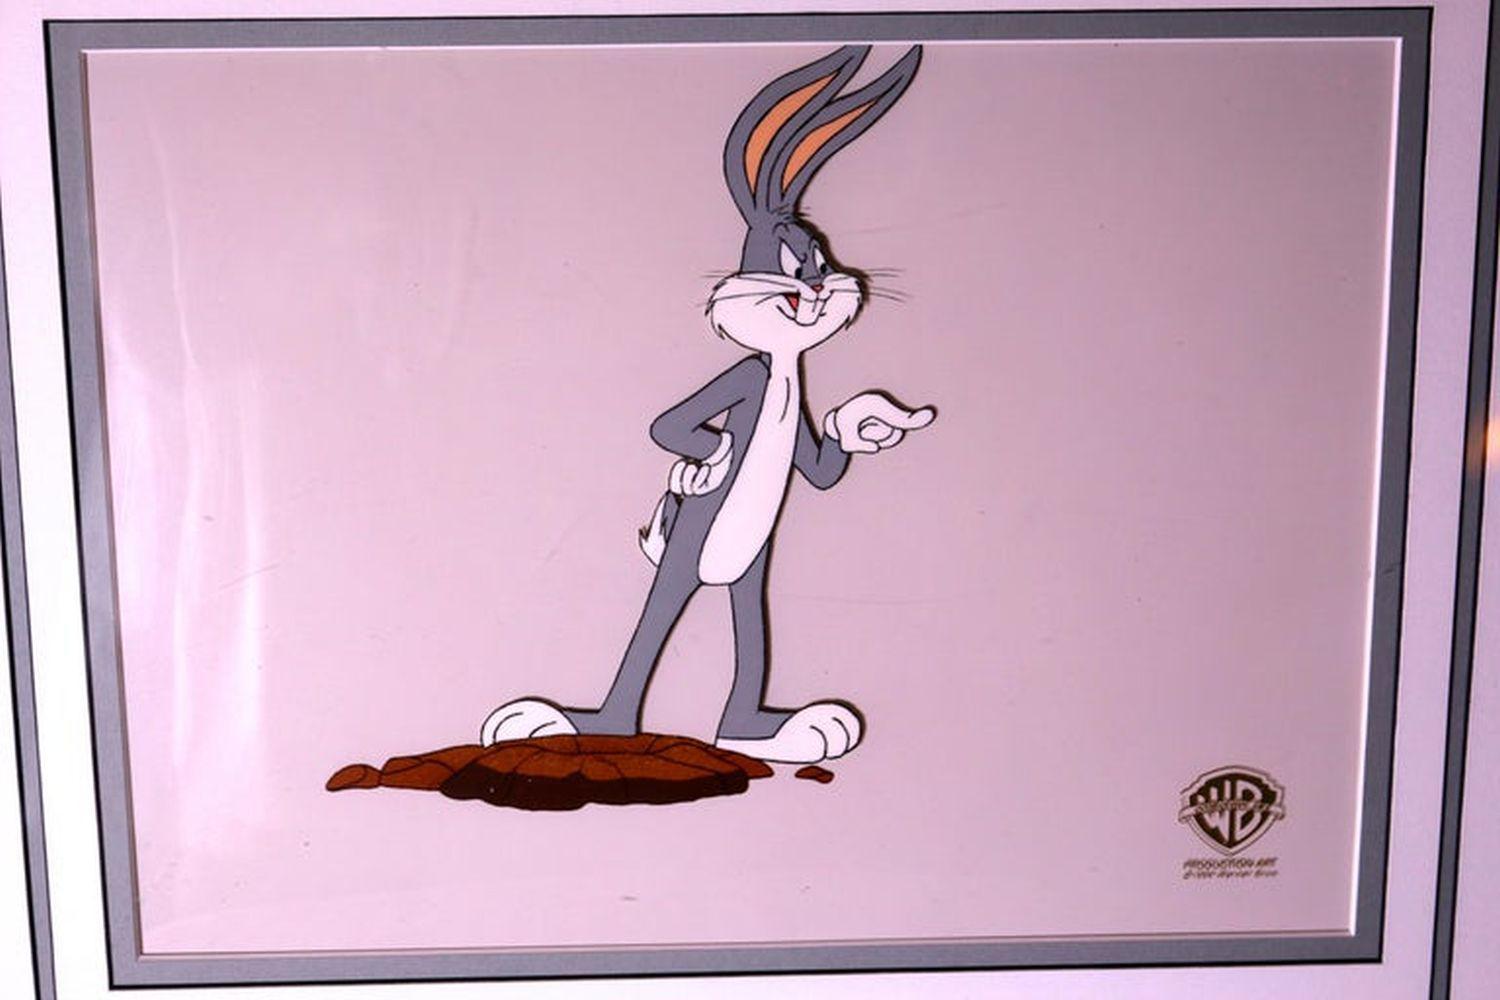 Single cell drawing of Iconic character Bugs Bunny. This item is stamped and dated. There is an authentication form within the frame in the back portion.